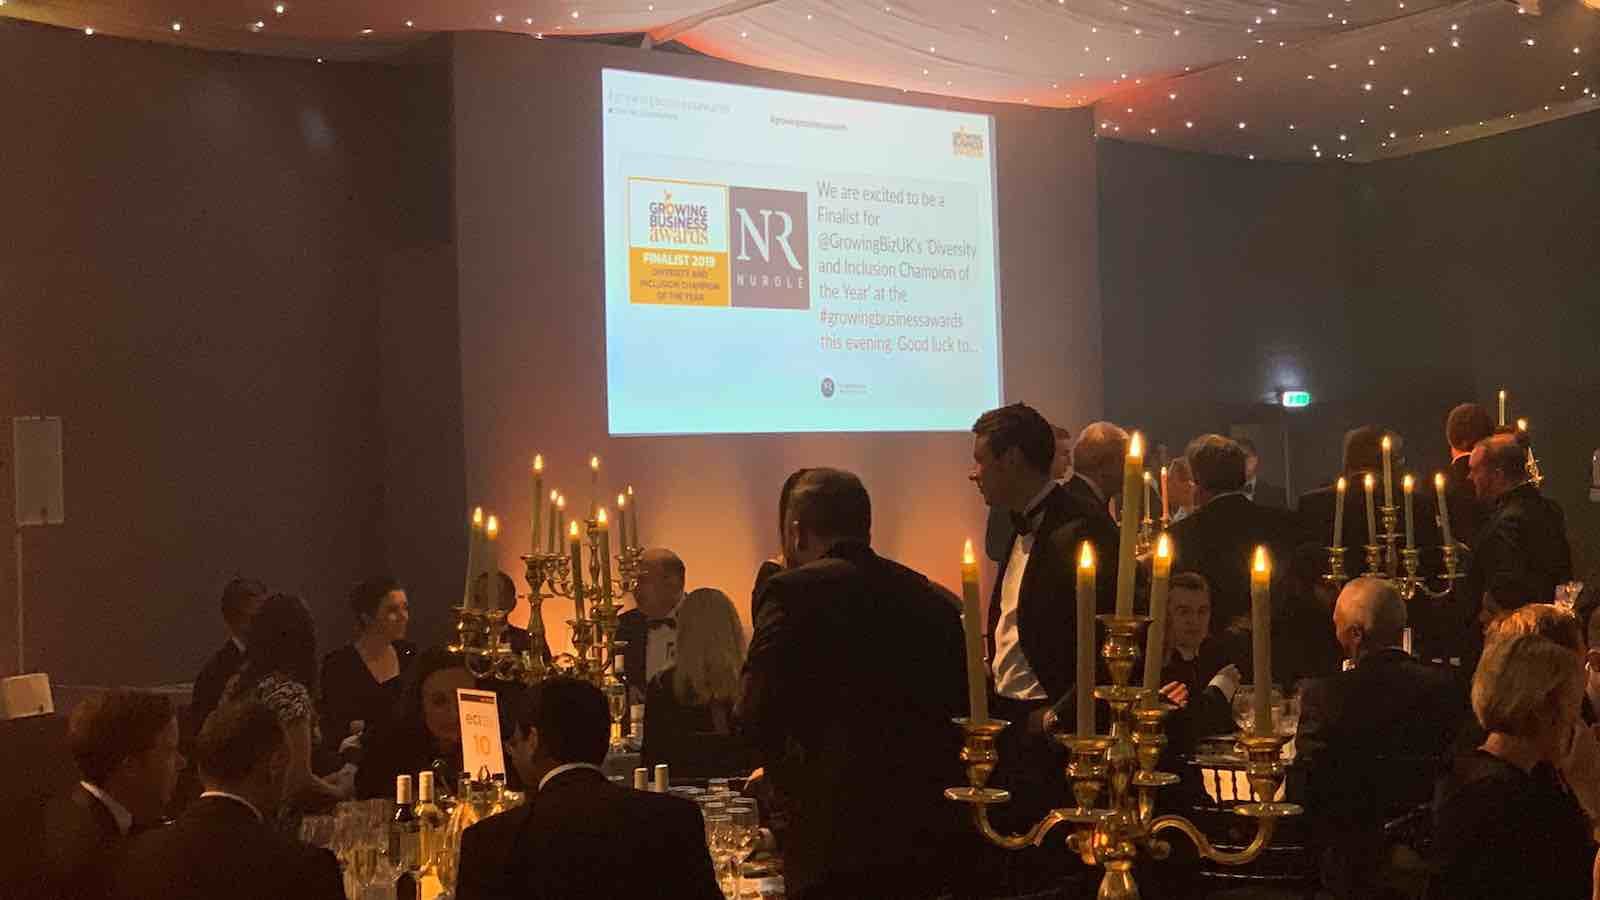 Nurole as Finalist at the Diversity and Inclusion Champion of 2019 Award